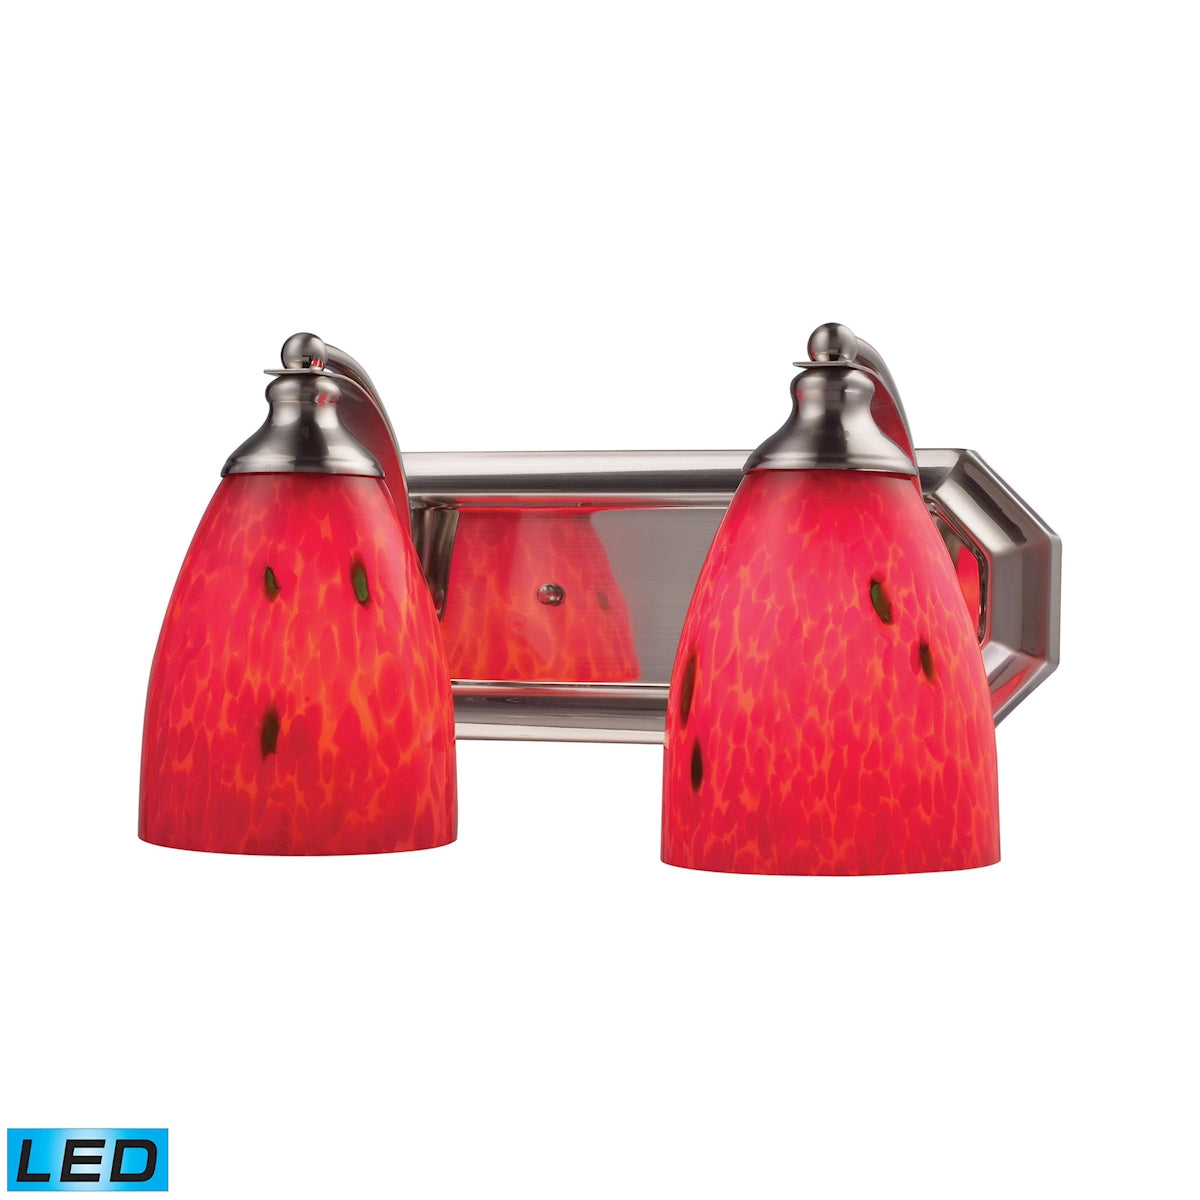 ELK Lighting 570-2N-FR-LED Mix-N-Match Vanity 2-Light Wall Lamp in Satin Nickel with Fire Red Glass - Includes LED Bulbs